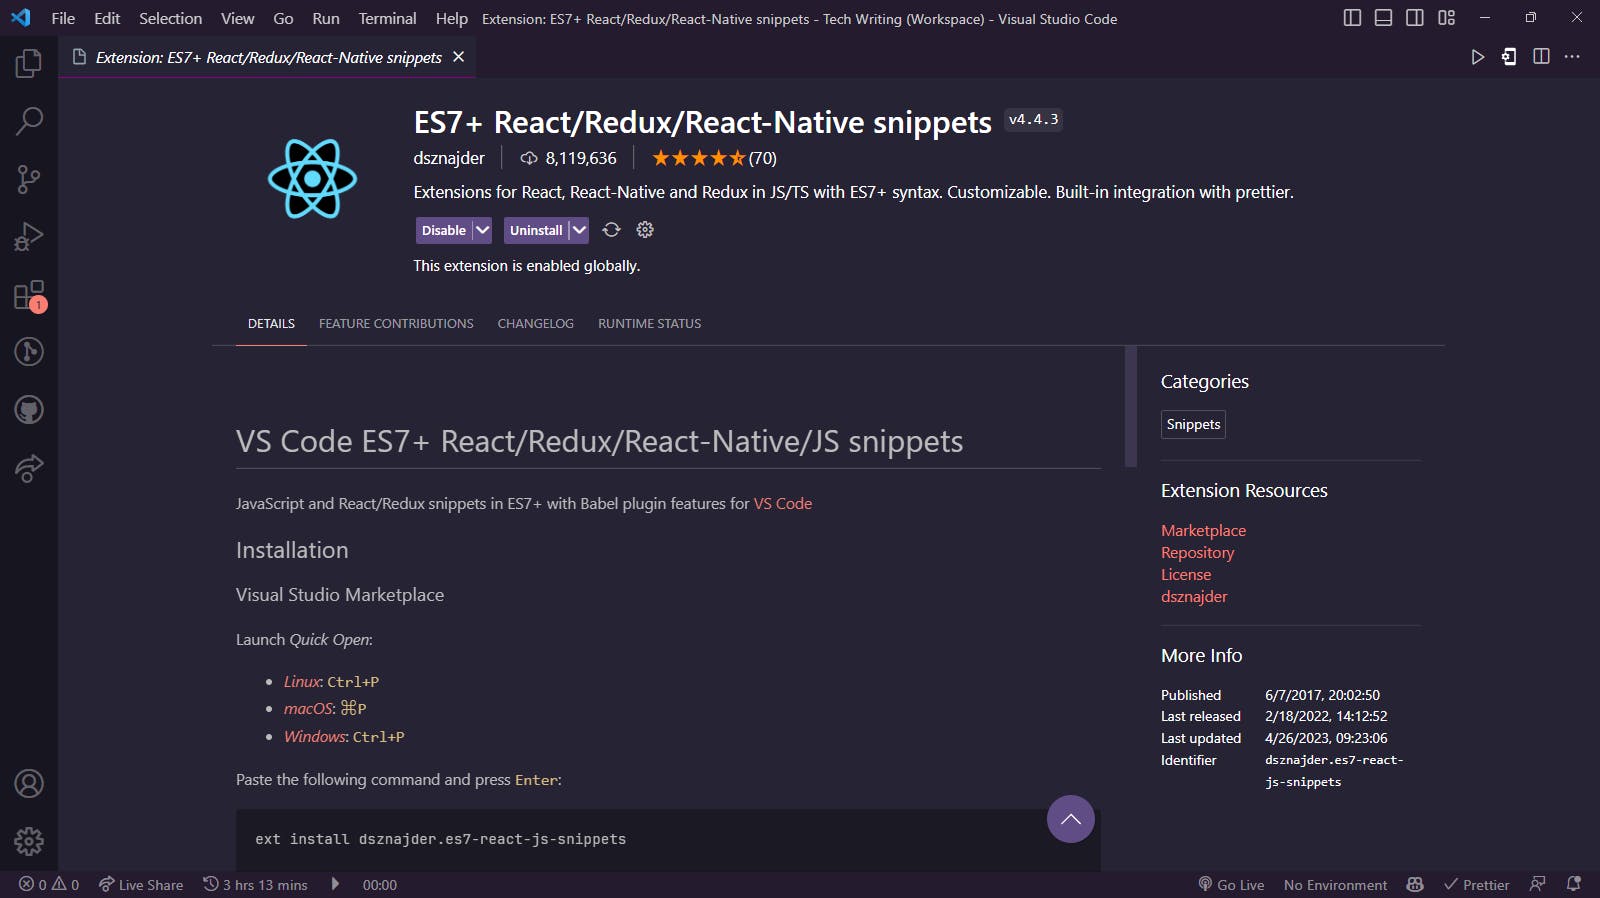 ES7+ React/Redux/React-Native Snippets